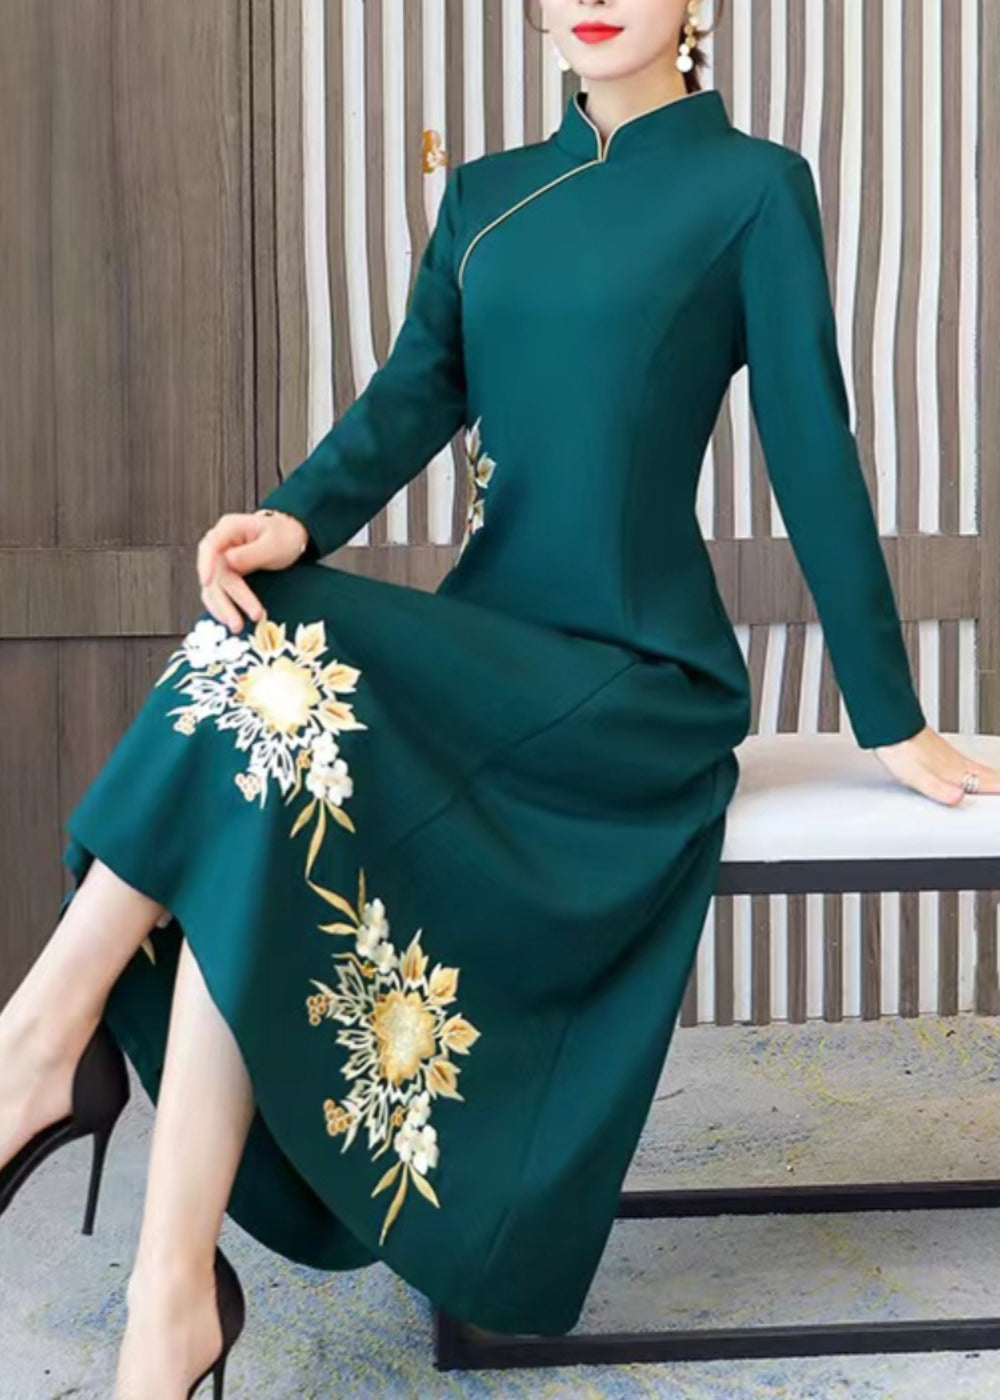 Classy Green Embroideried Patchwork Cotton Maxi Dresses Fall